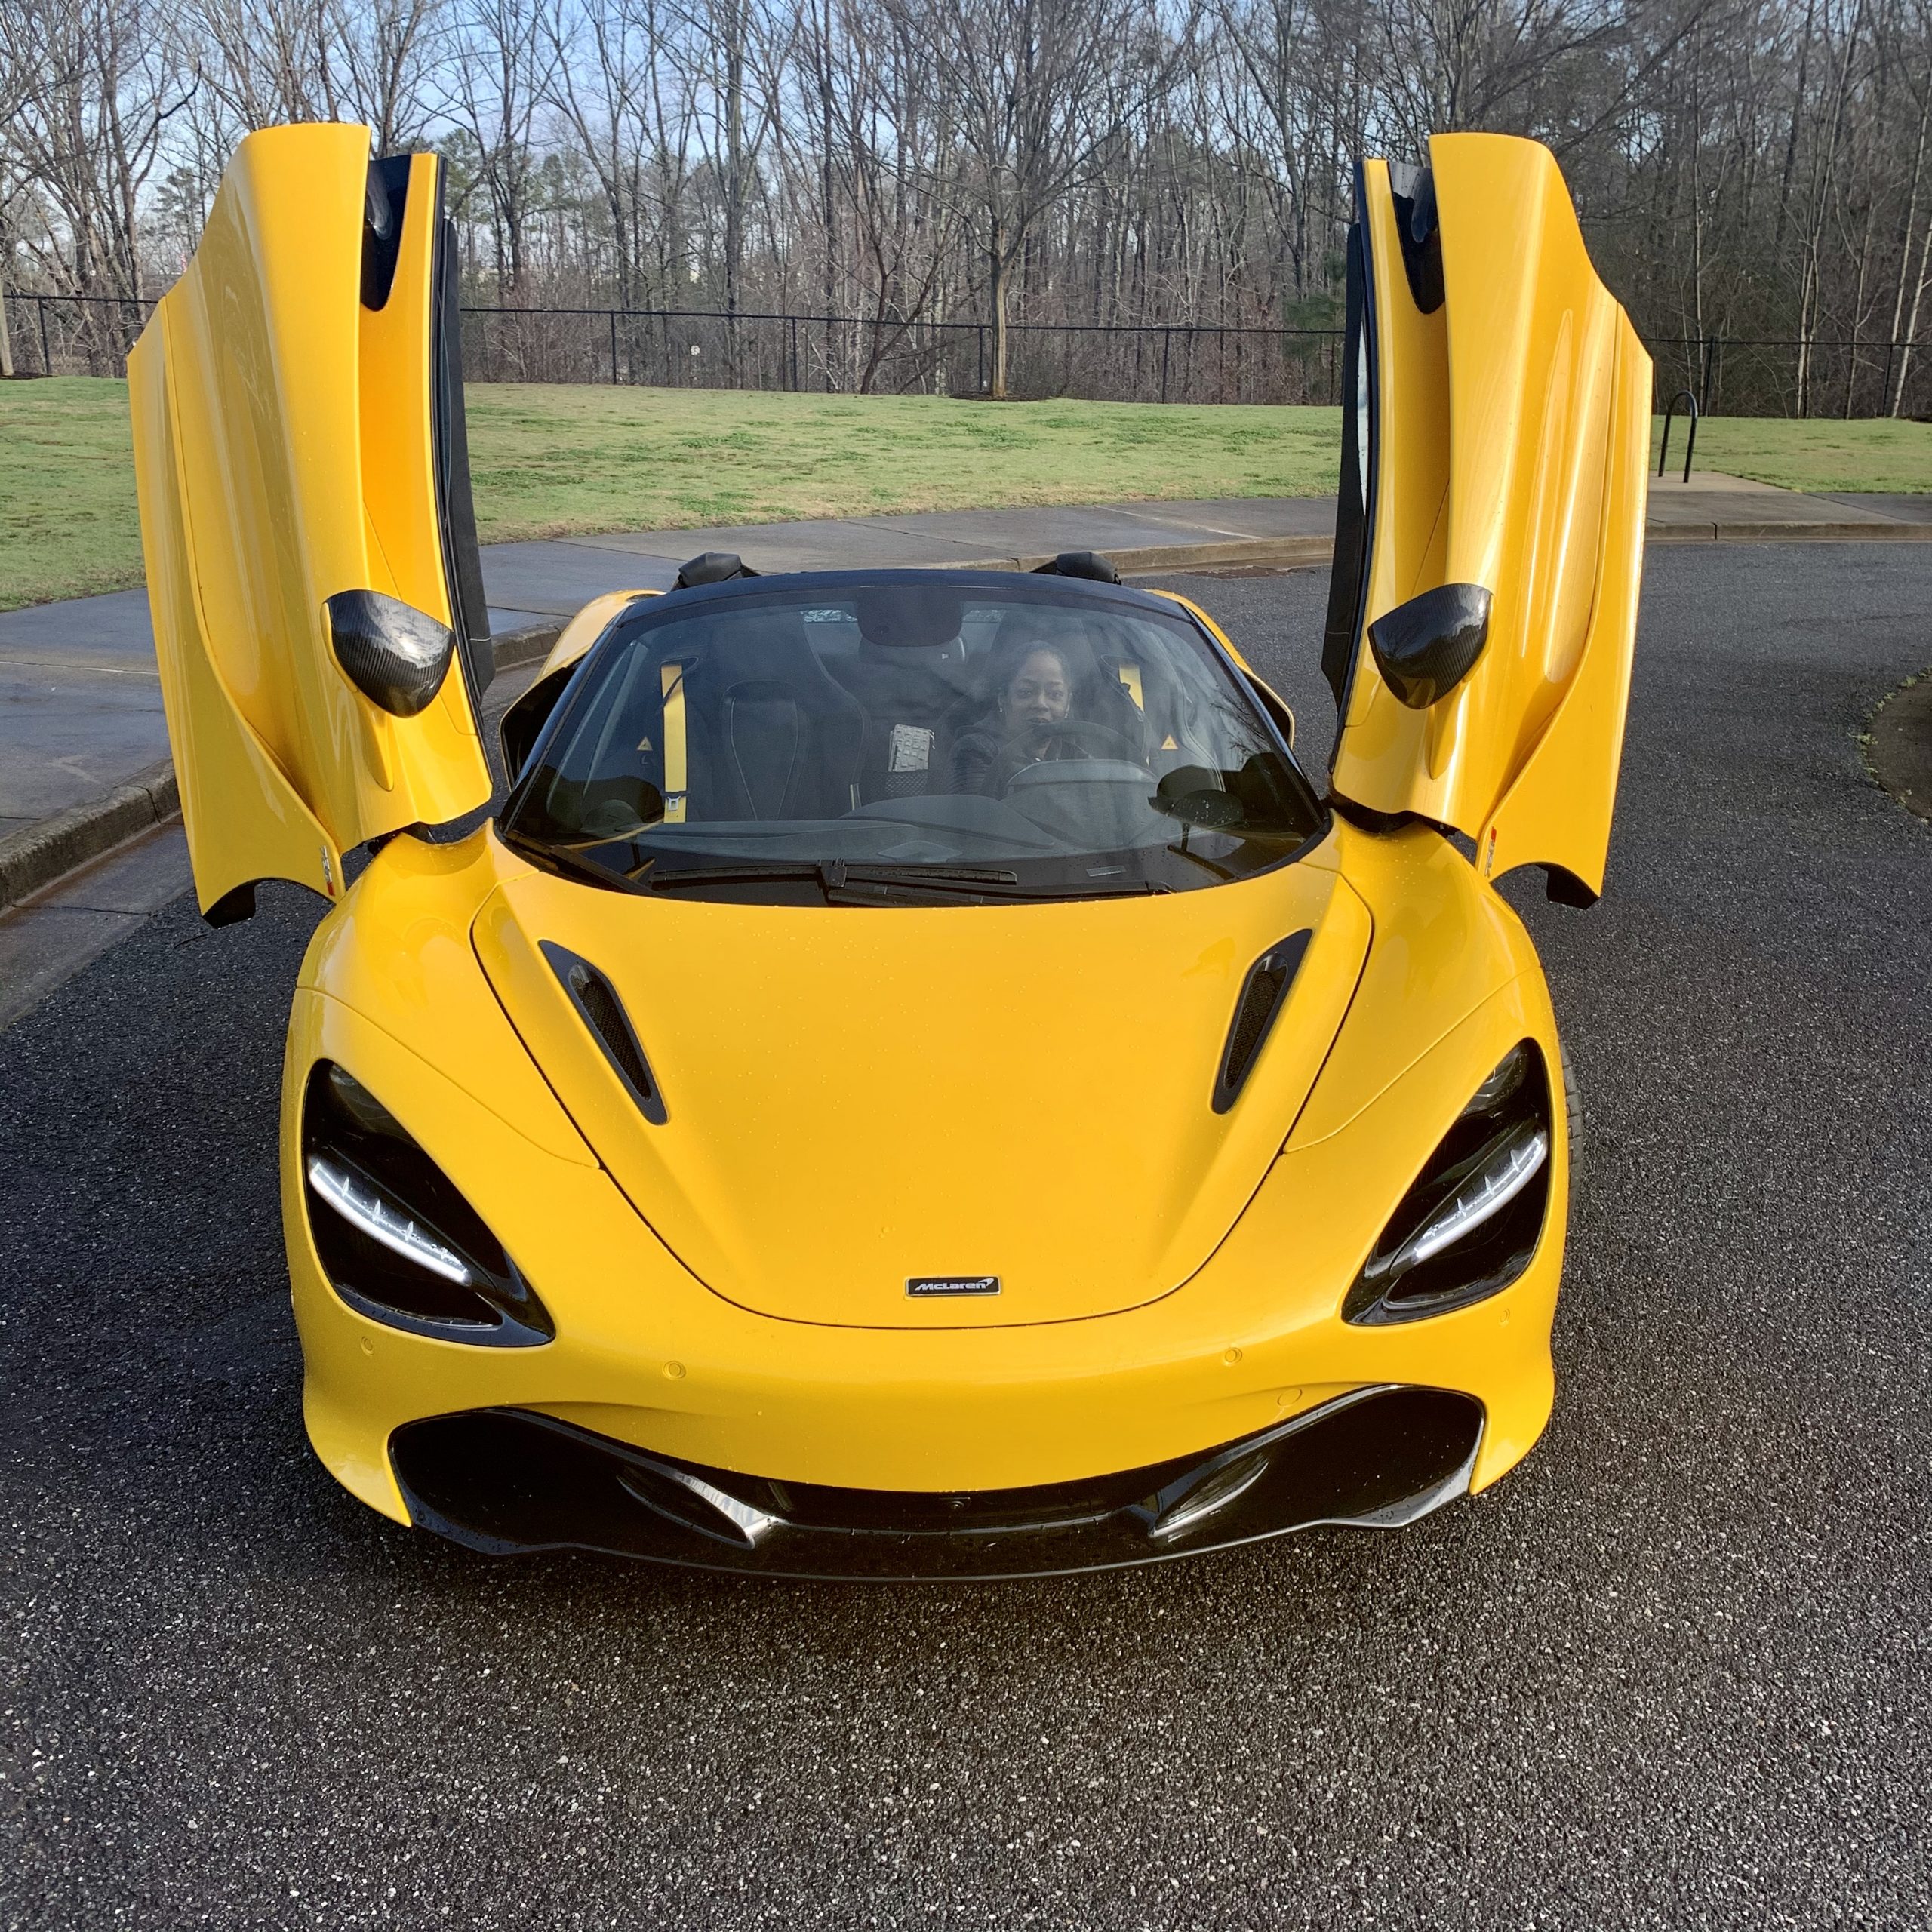 Ten Things I Learned While Driving The 2019 McLaren 720s Spider